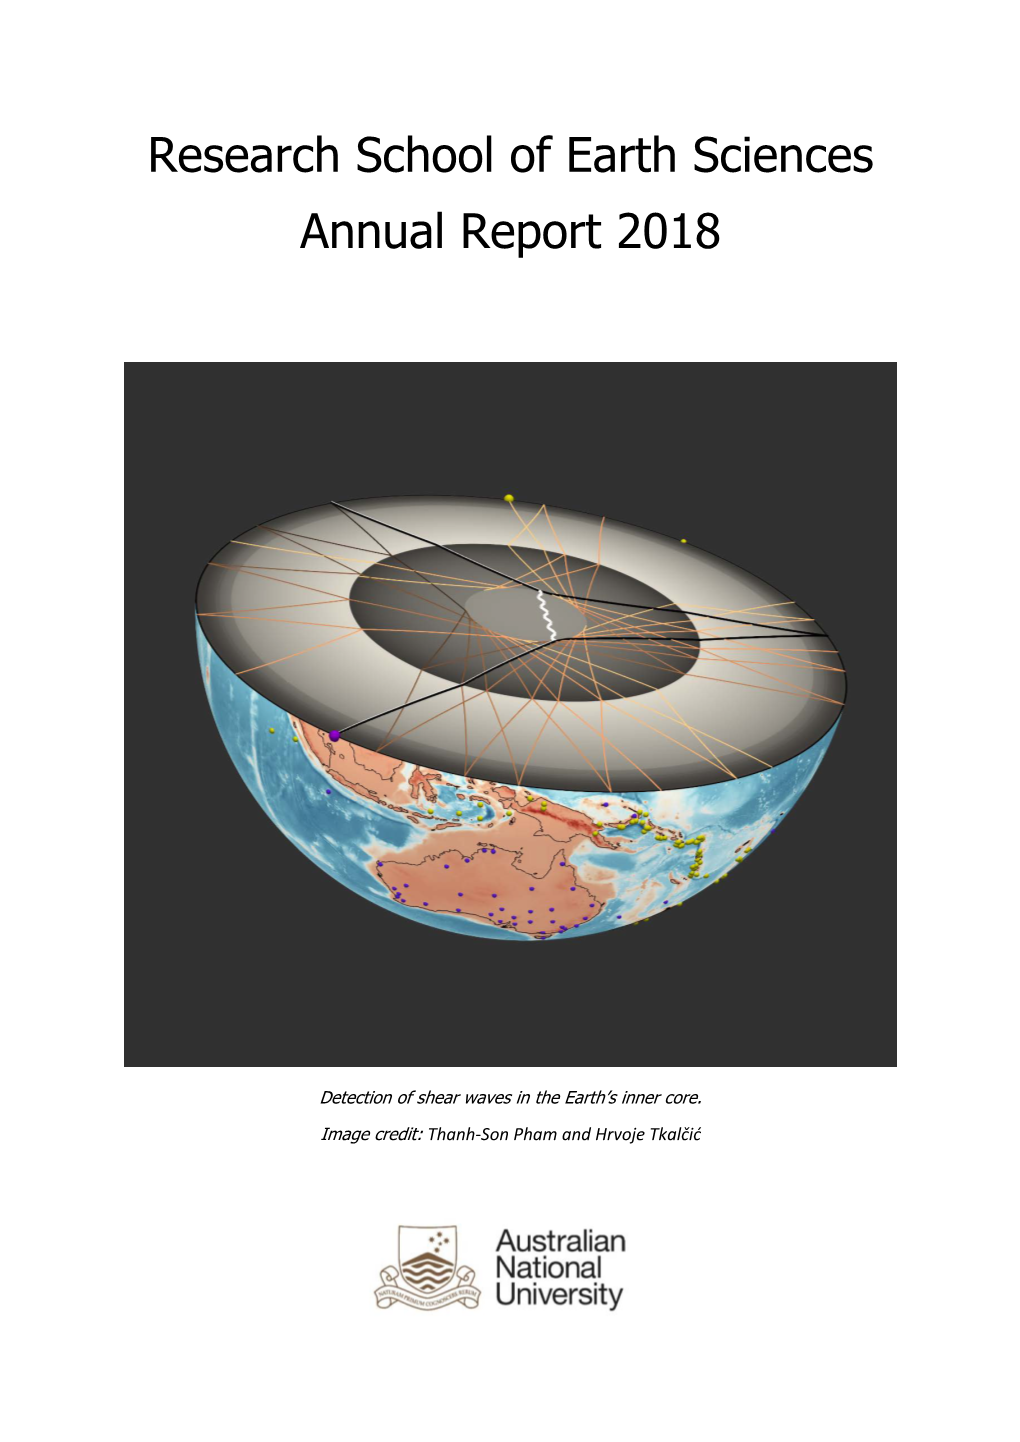 Research School of Earth Sciences Annual Report 2018